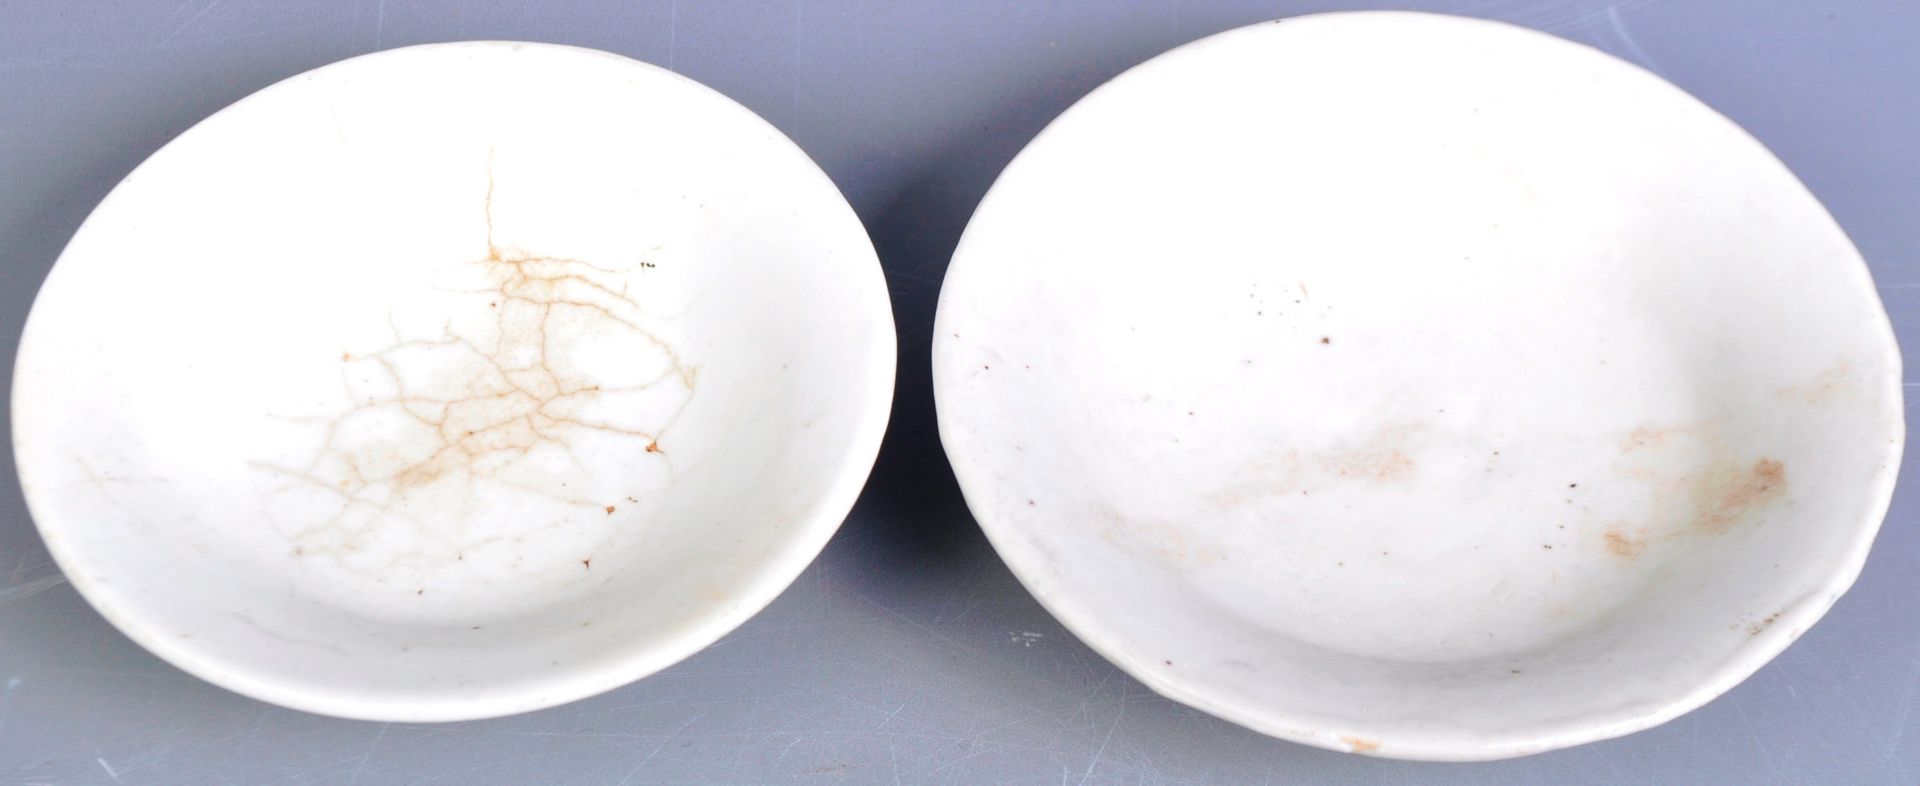 PAIR OF 17TH CENTURY CHINESE MING DYNASTY SAUCER PLATES